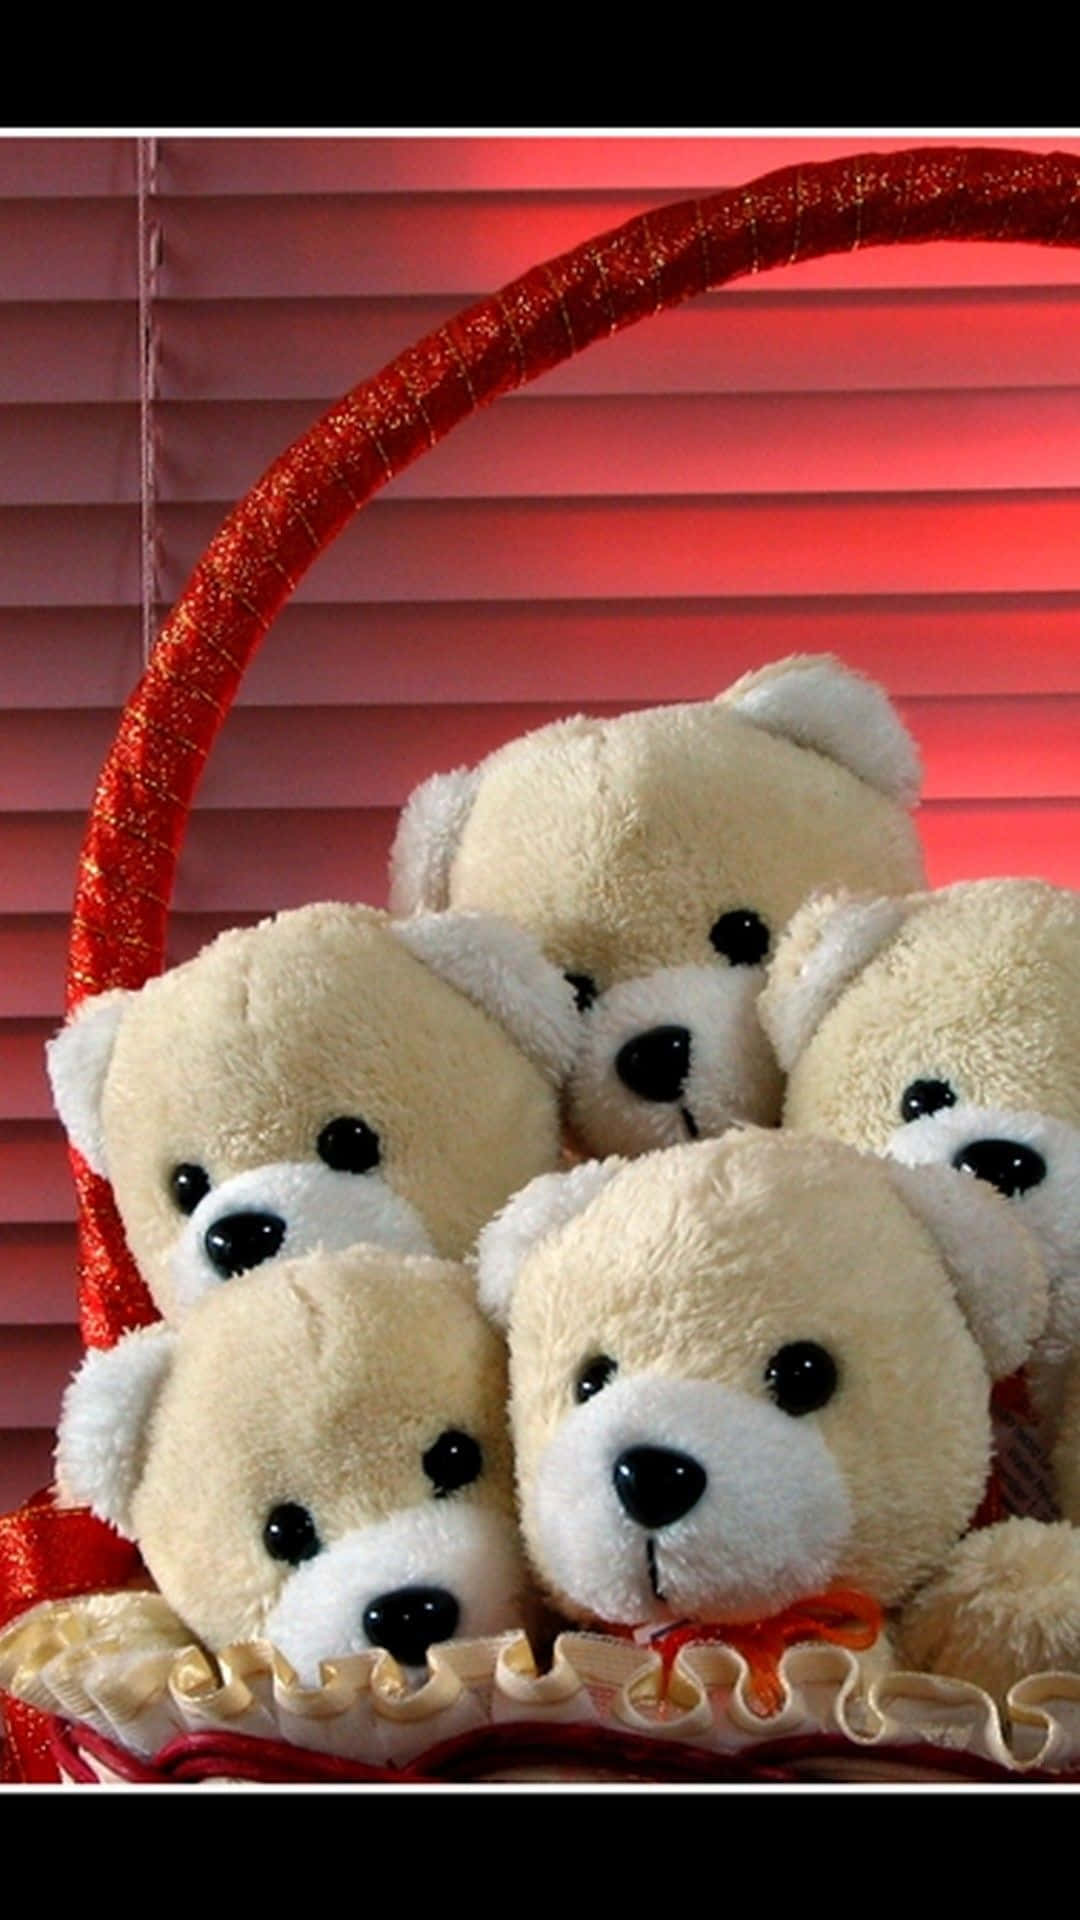 A Basket With Teddy Bears In It